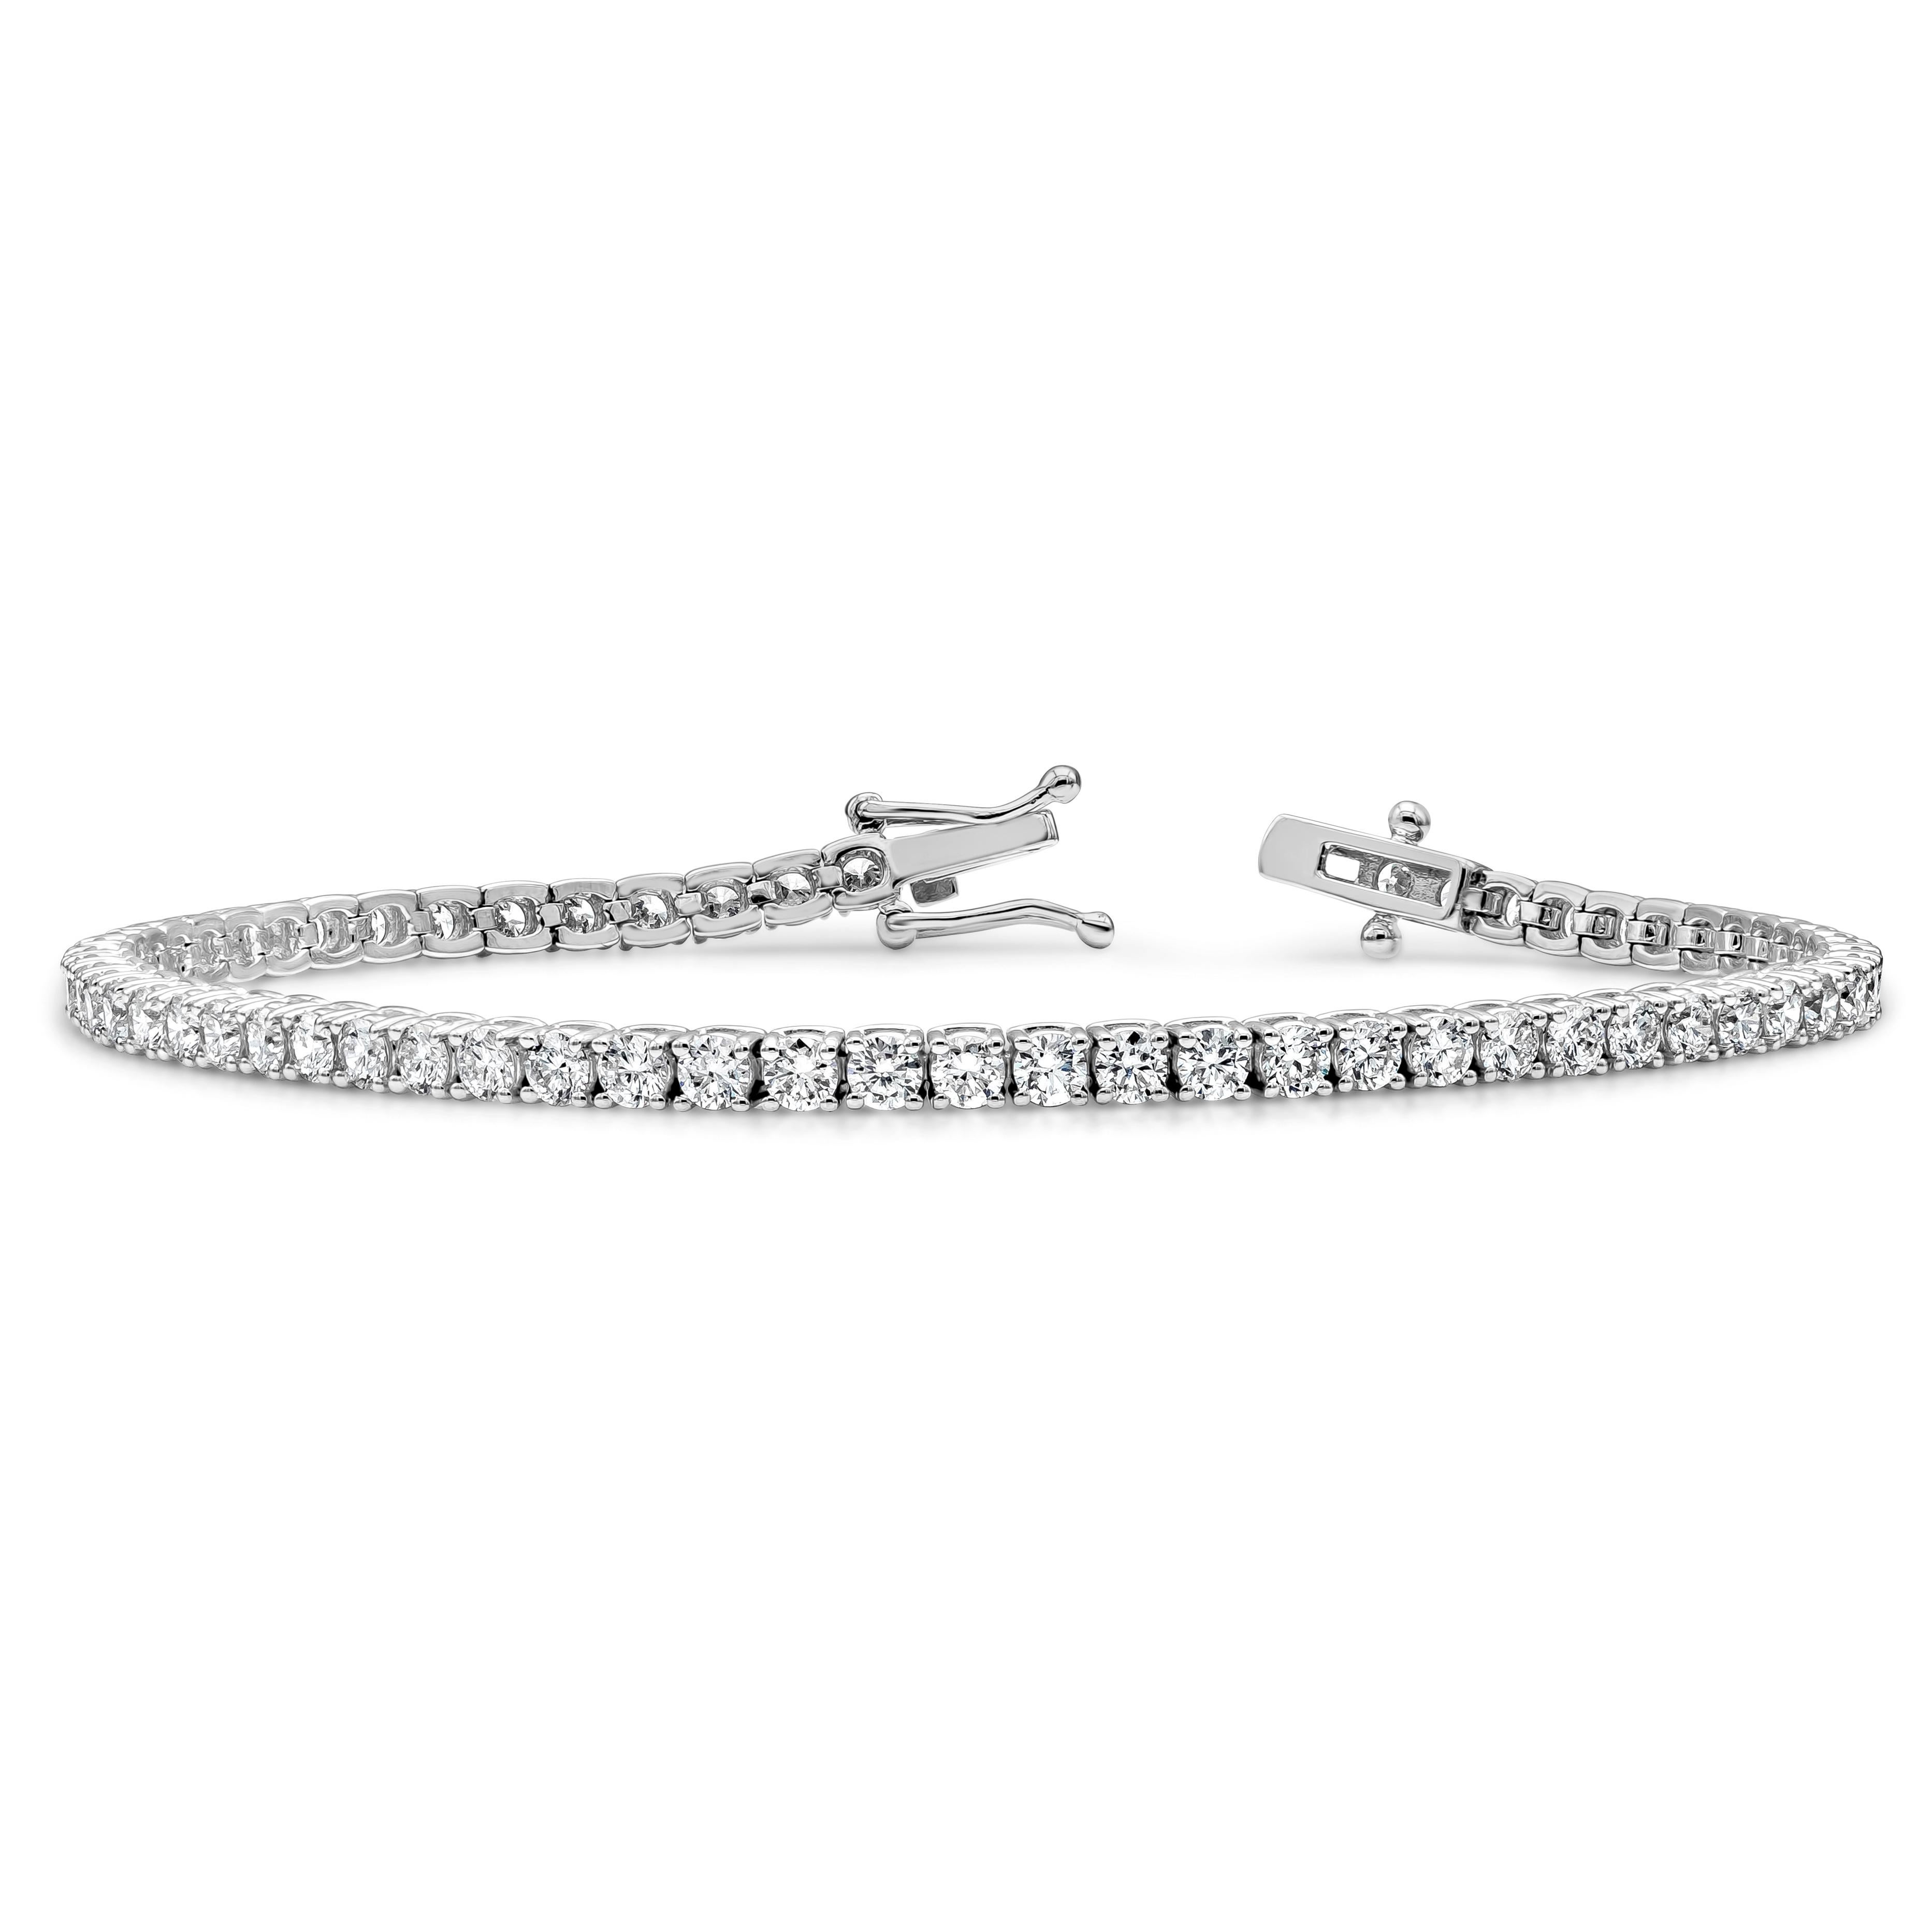 A classic tennis bracelet style showcasing 62 round brilliant diamonds, Diamonds weigh 4.03 carats total and are approximately F color, VS-SI clarity. 7 inches in Length. 2.50mm in Width. Made in 18K White Gold

Roman Malakov is a custom house,